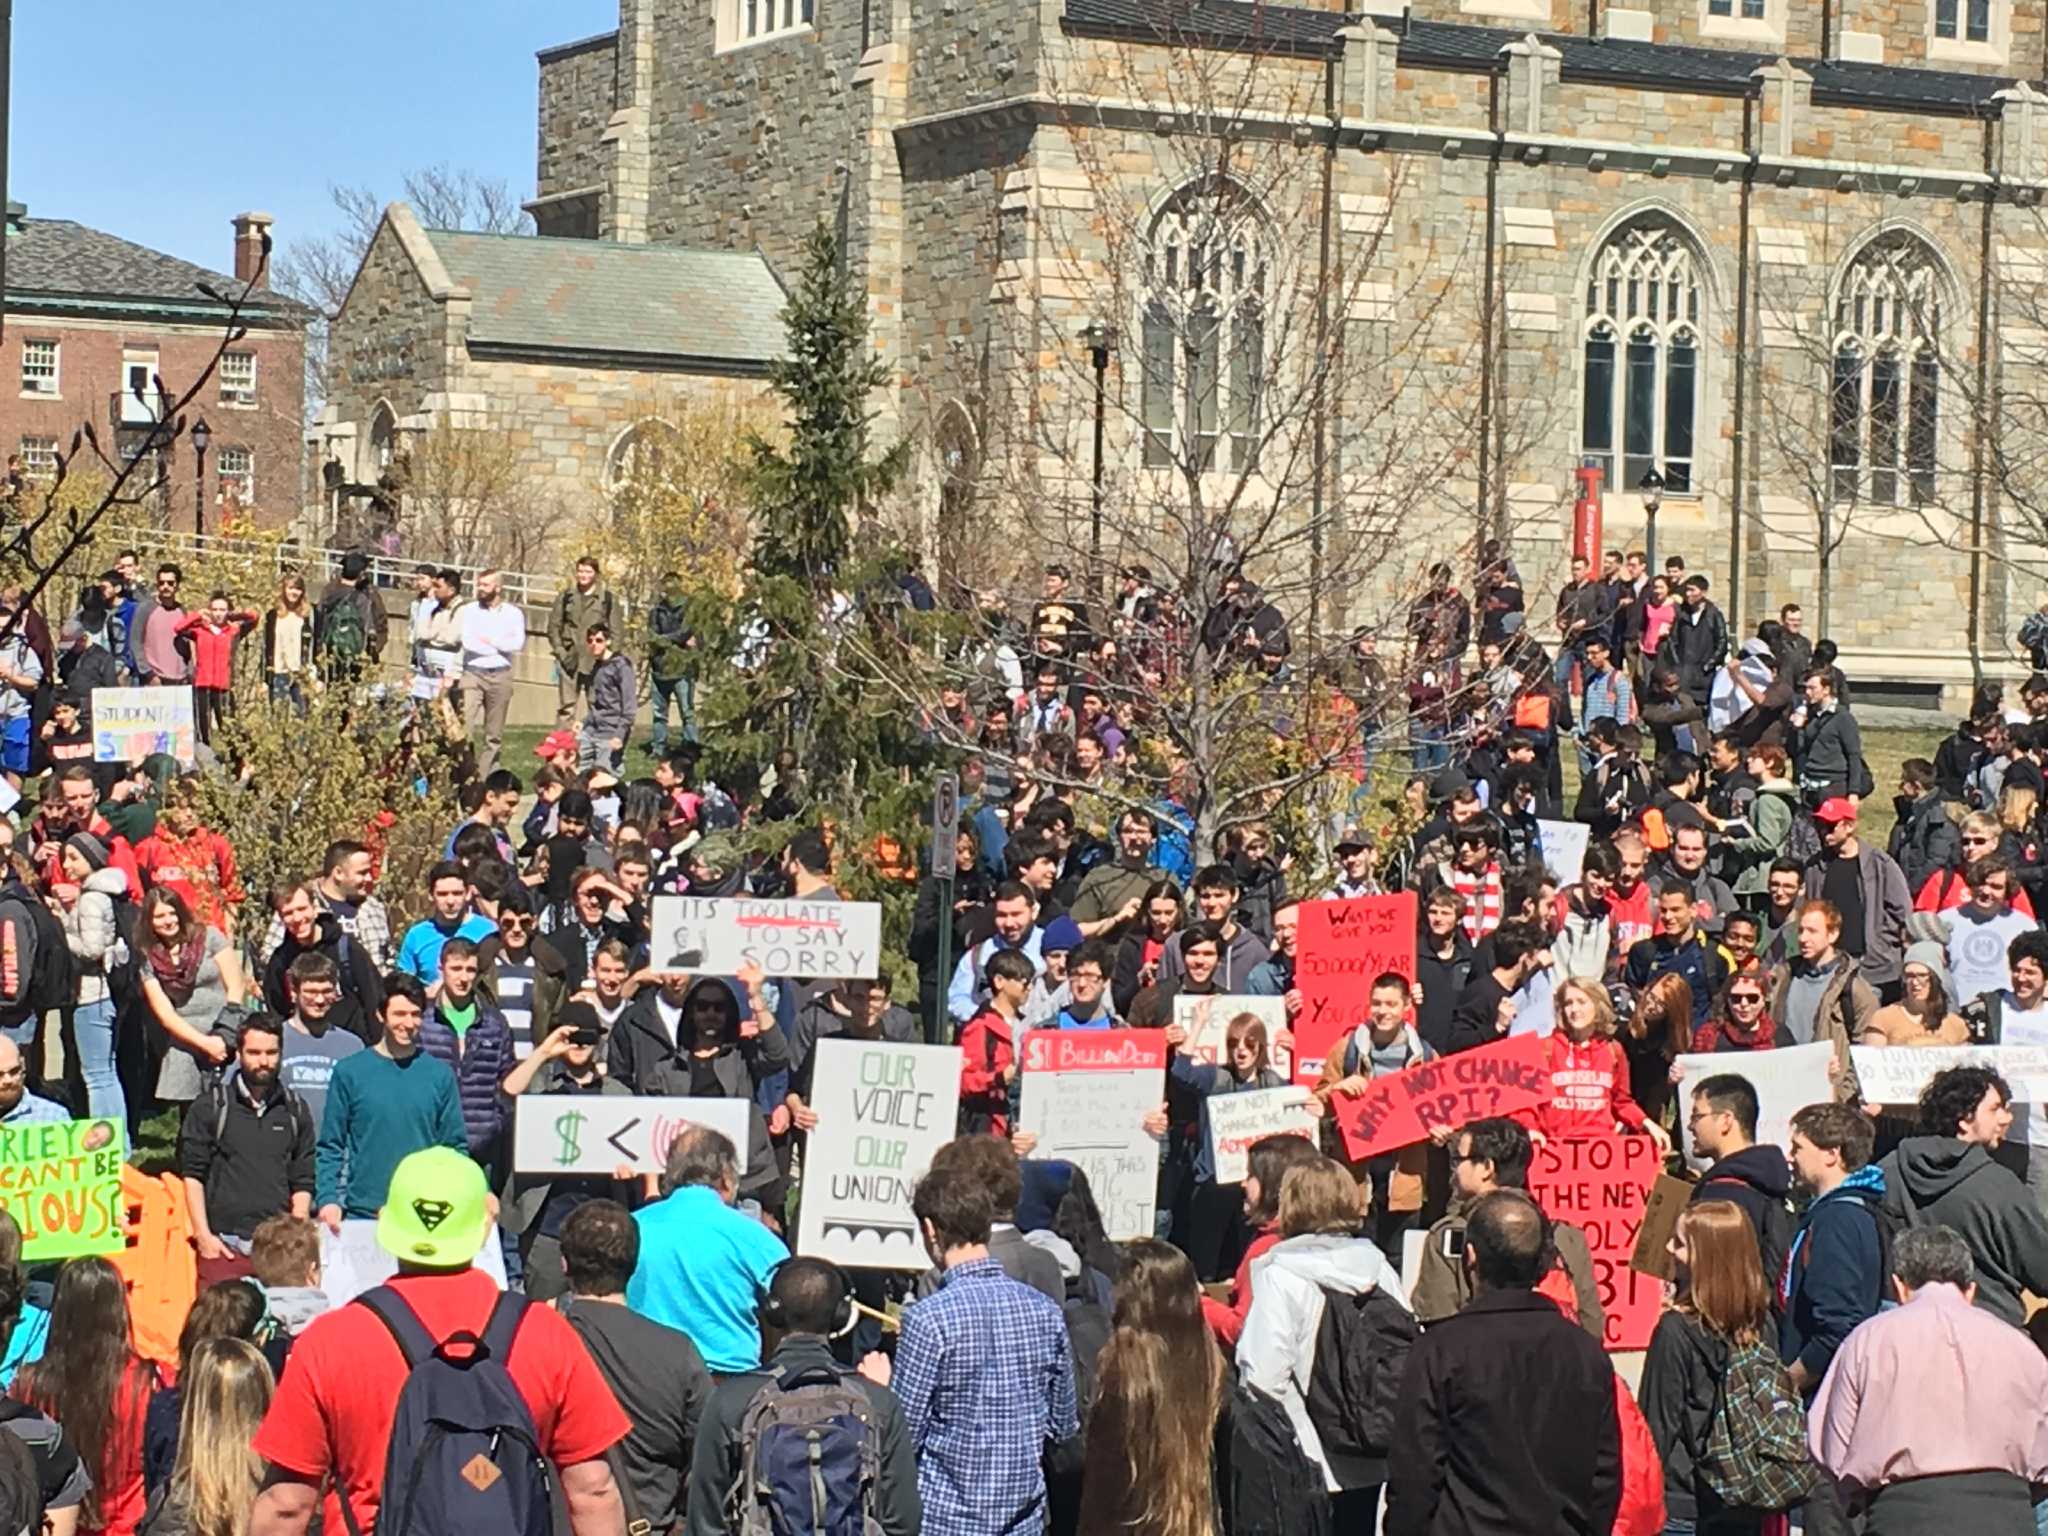 RPI students protest policy on student union